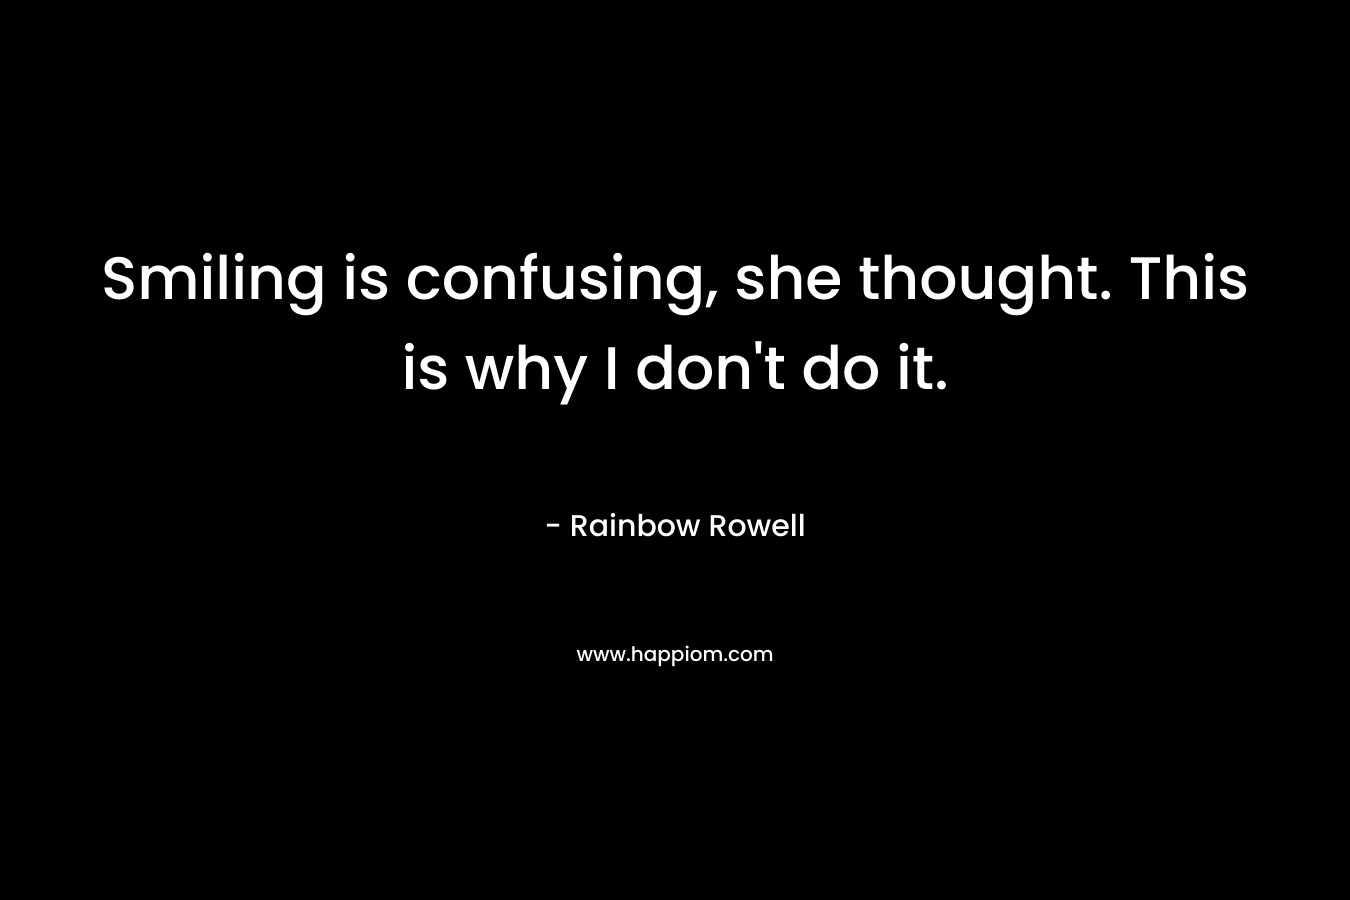 Smiling is confusing, she thought. This is why I don’t do it. – Rainbow Rowell